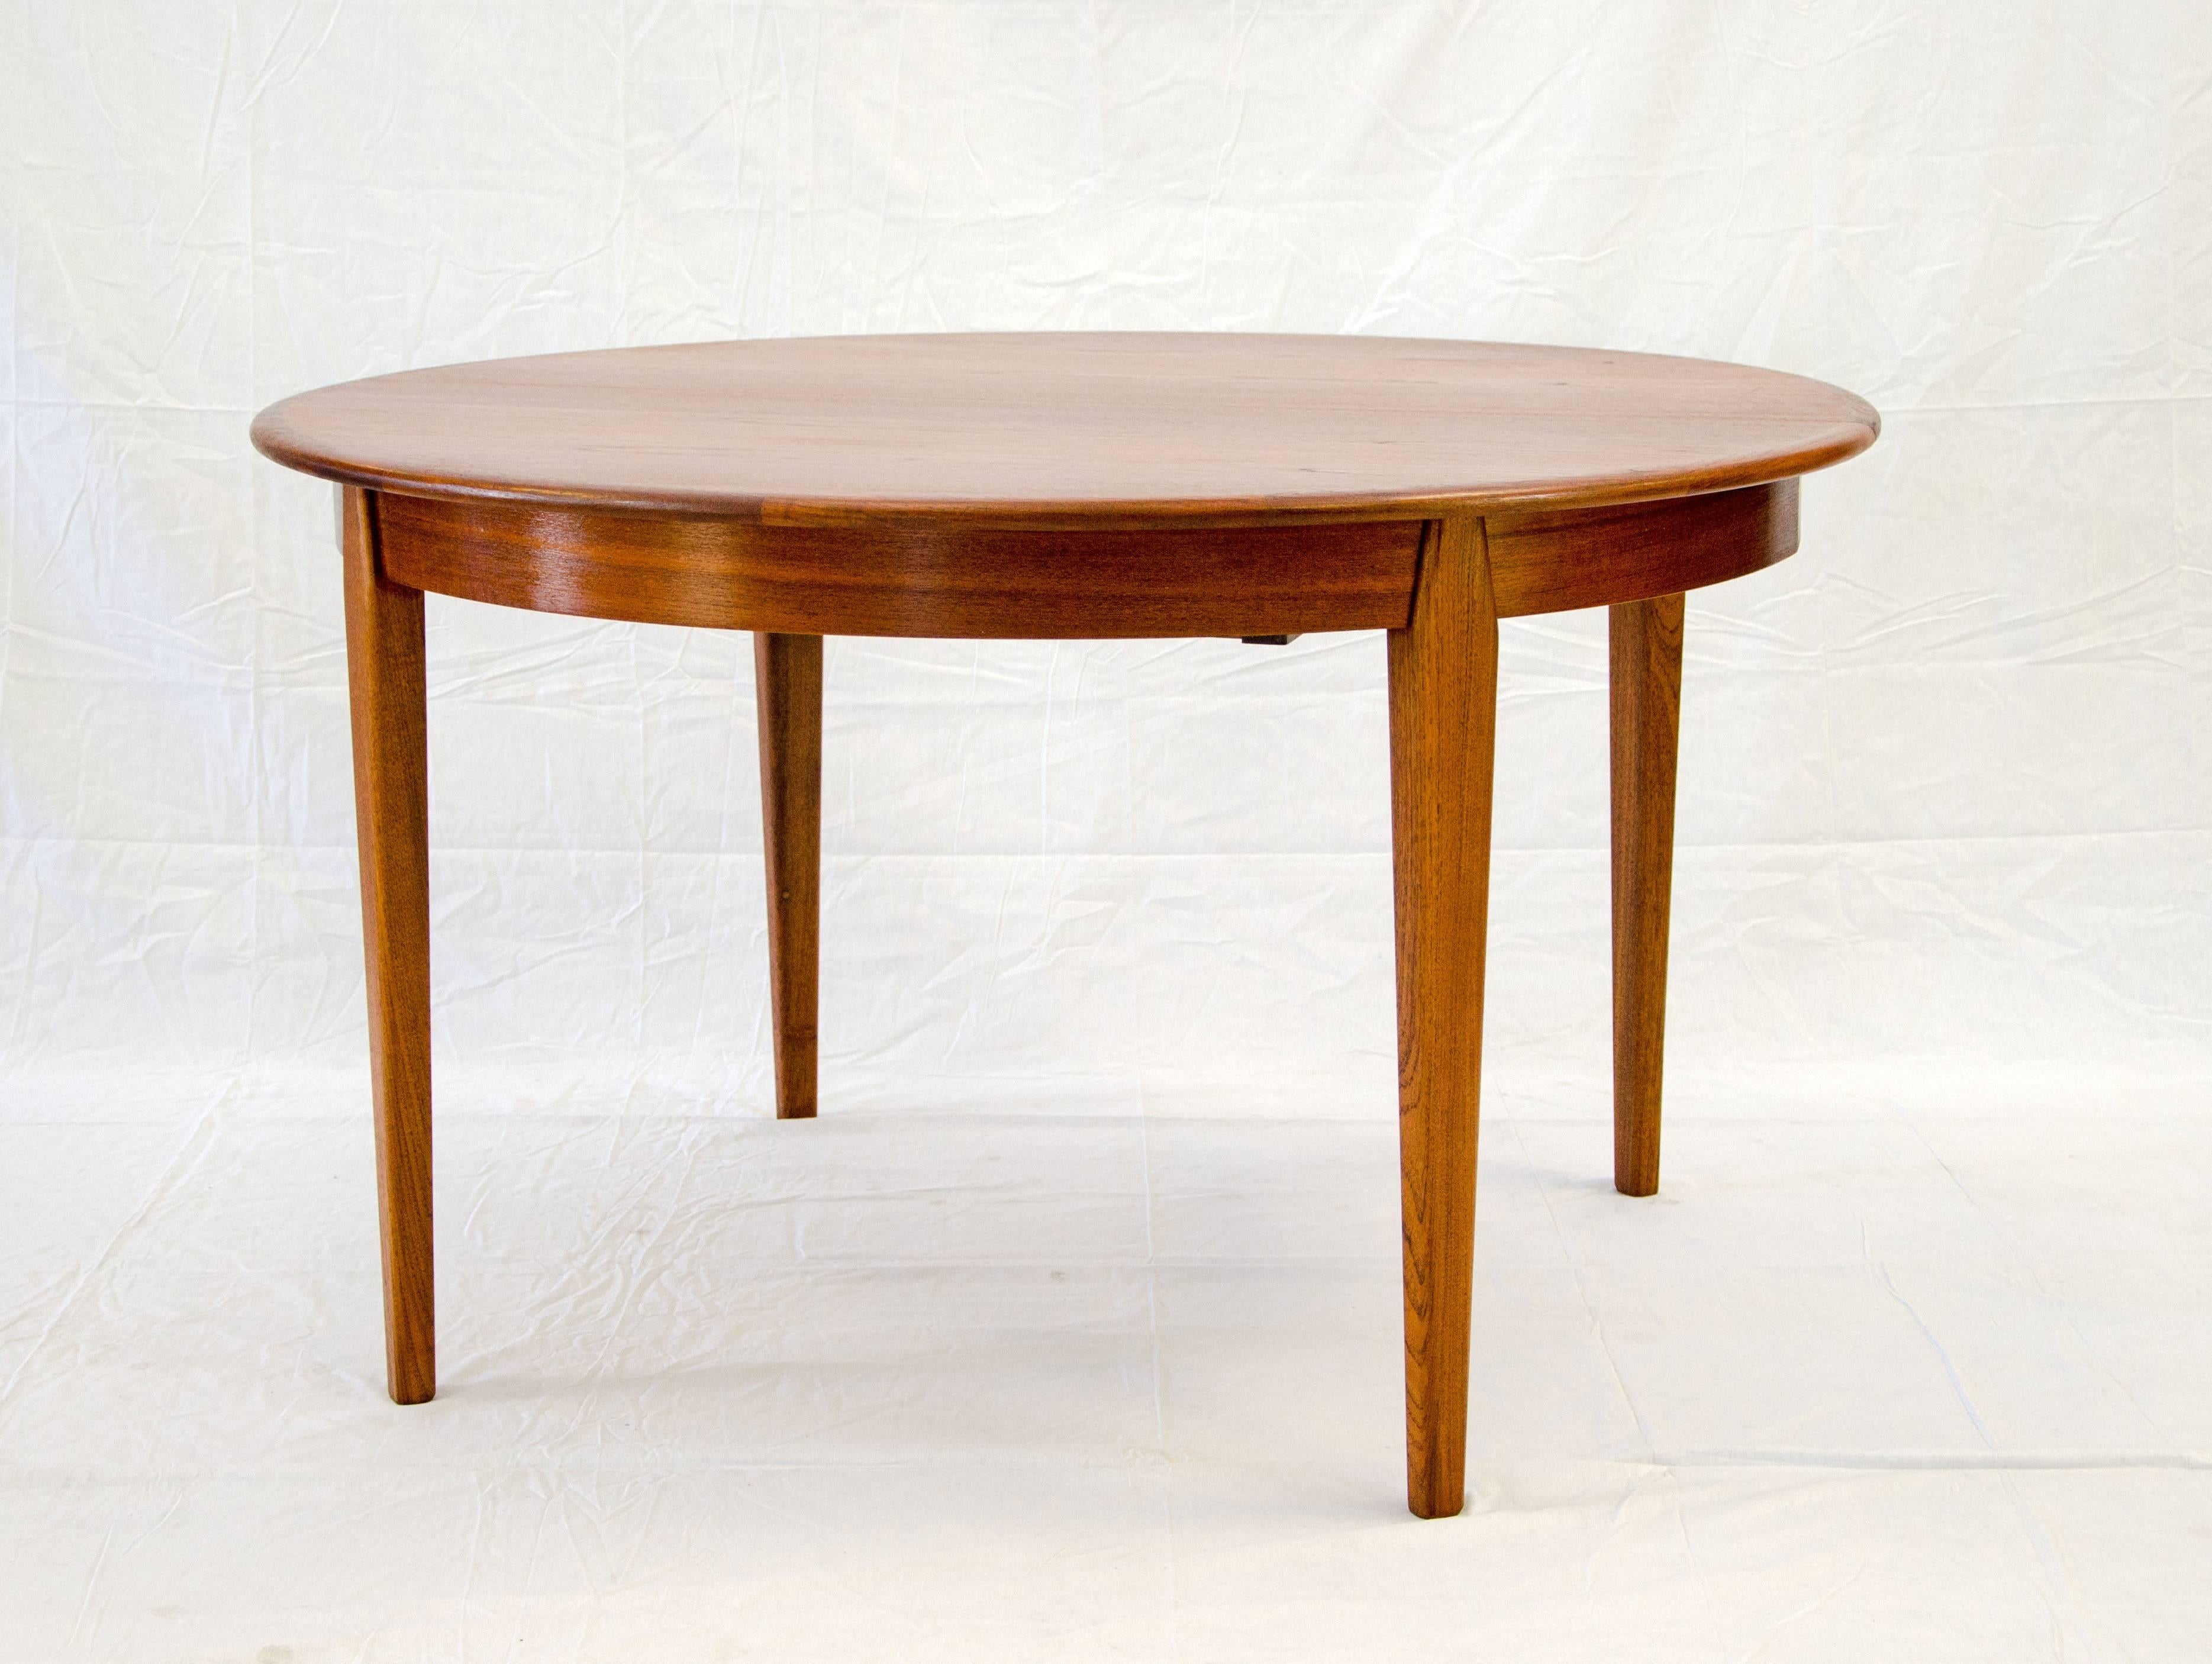 Scandinavian Modern Danish Teak Round Dining Table, Three Leaves with Aprons by H. Sigh & Sons